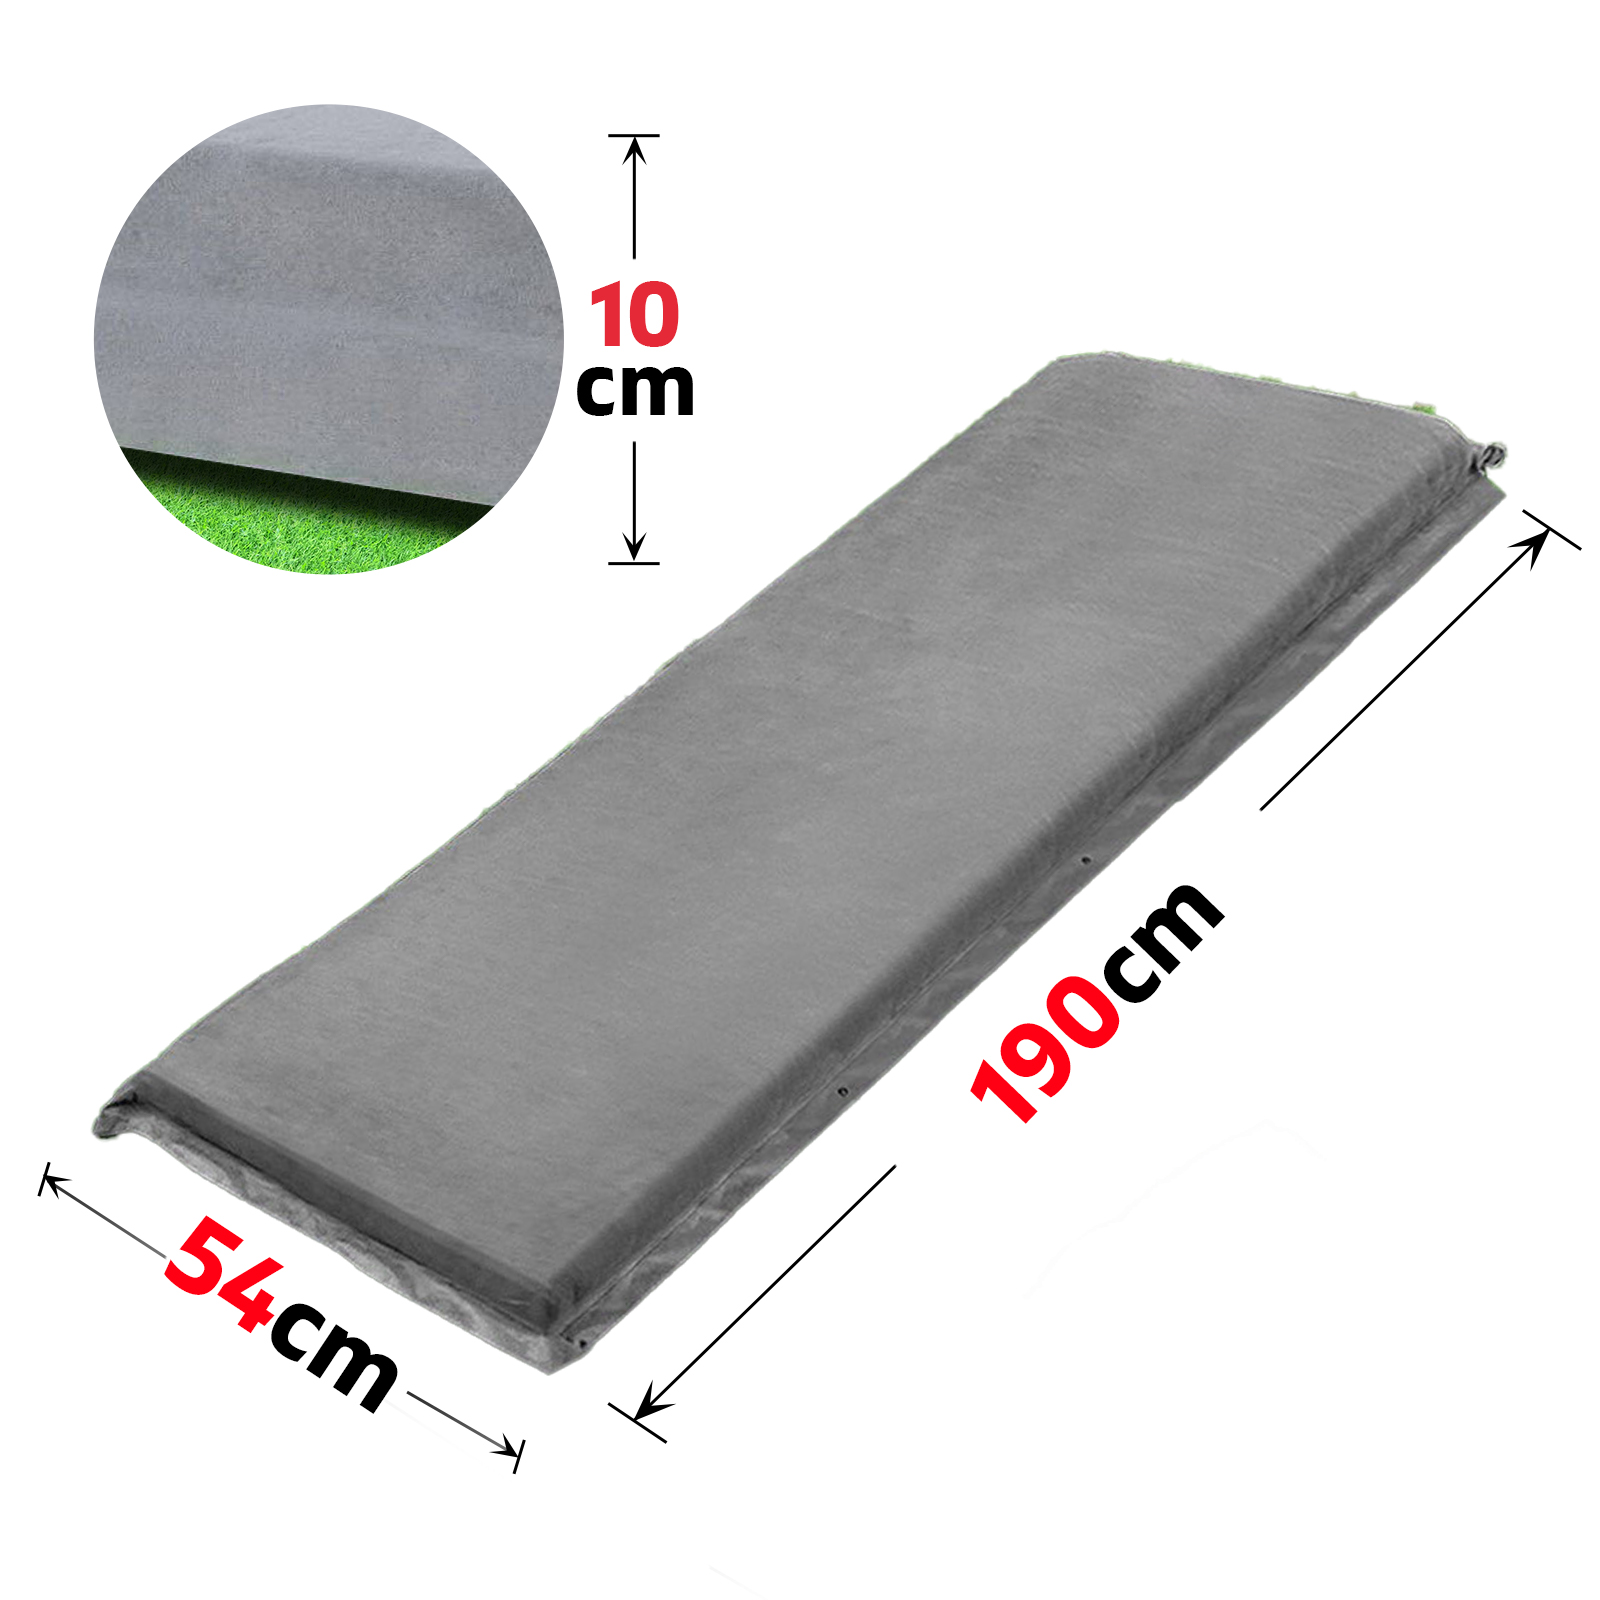 Single Size Self Inflating Mattress Bed Grey 10cm Thick Easy-Roll-Up Camping